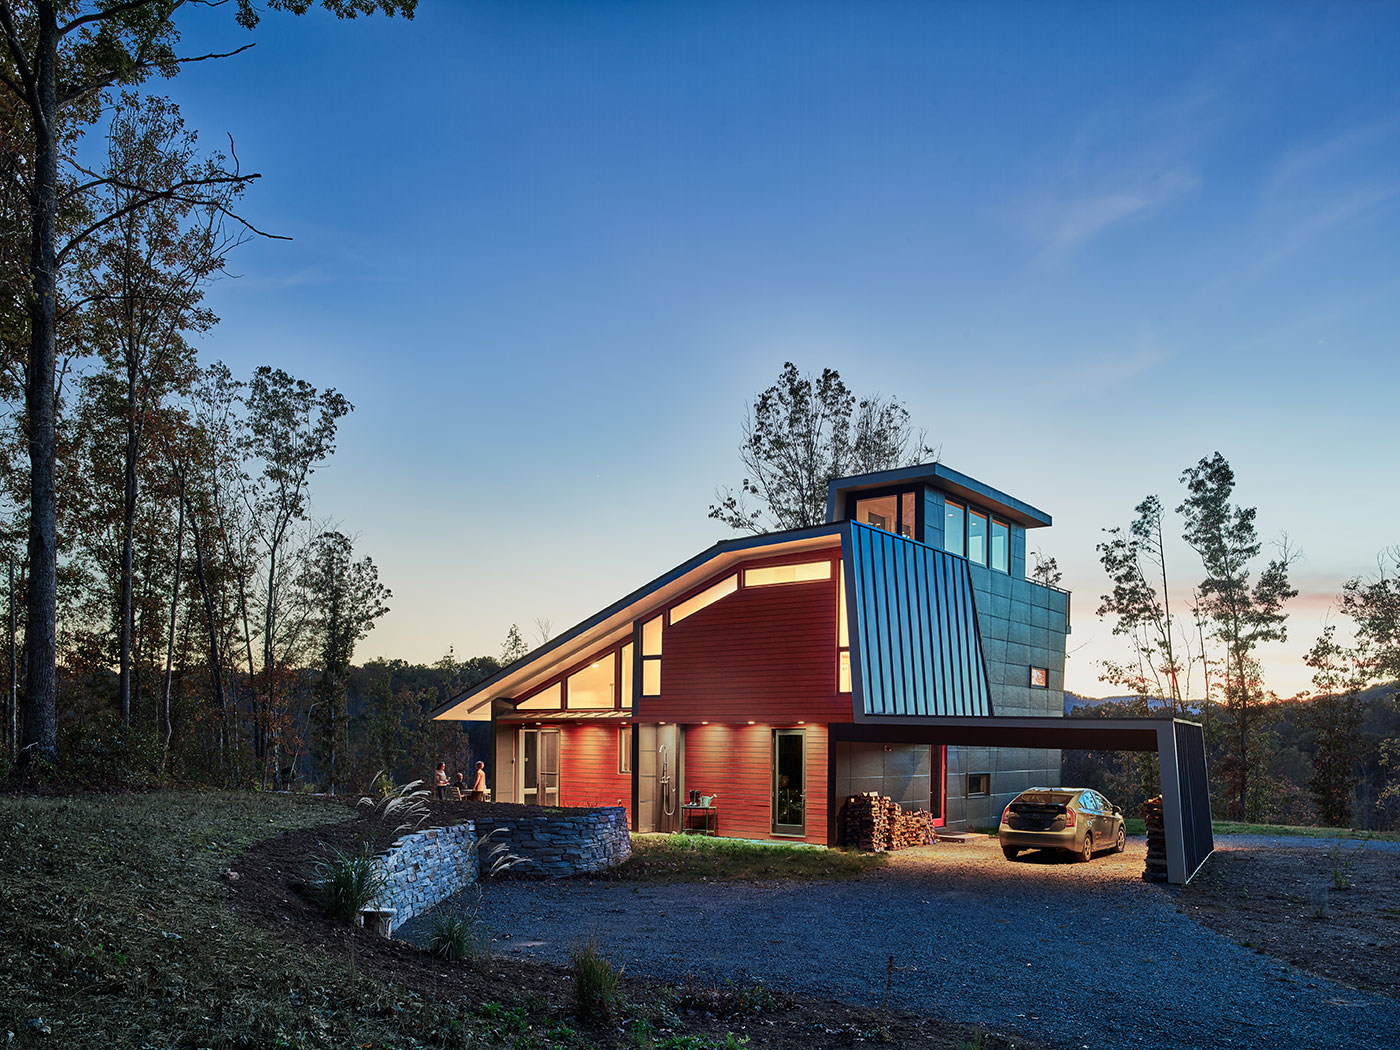 Charlottesville Net Zero Home With Standing Seam Metal Roof, Wood Shiplap and Hardipanel Siding by Virginia Residential Architect Chris Hays.